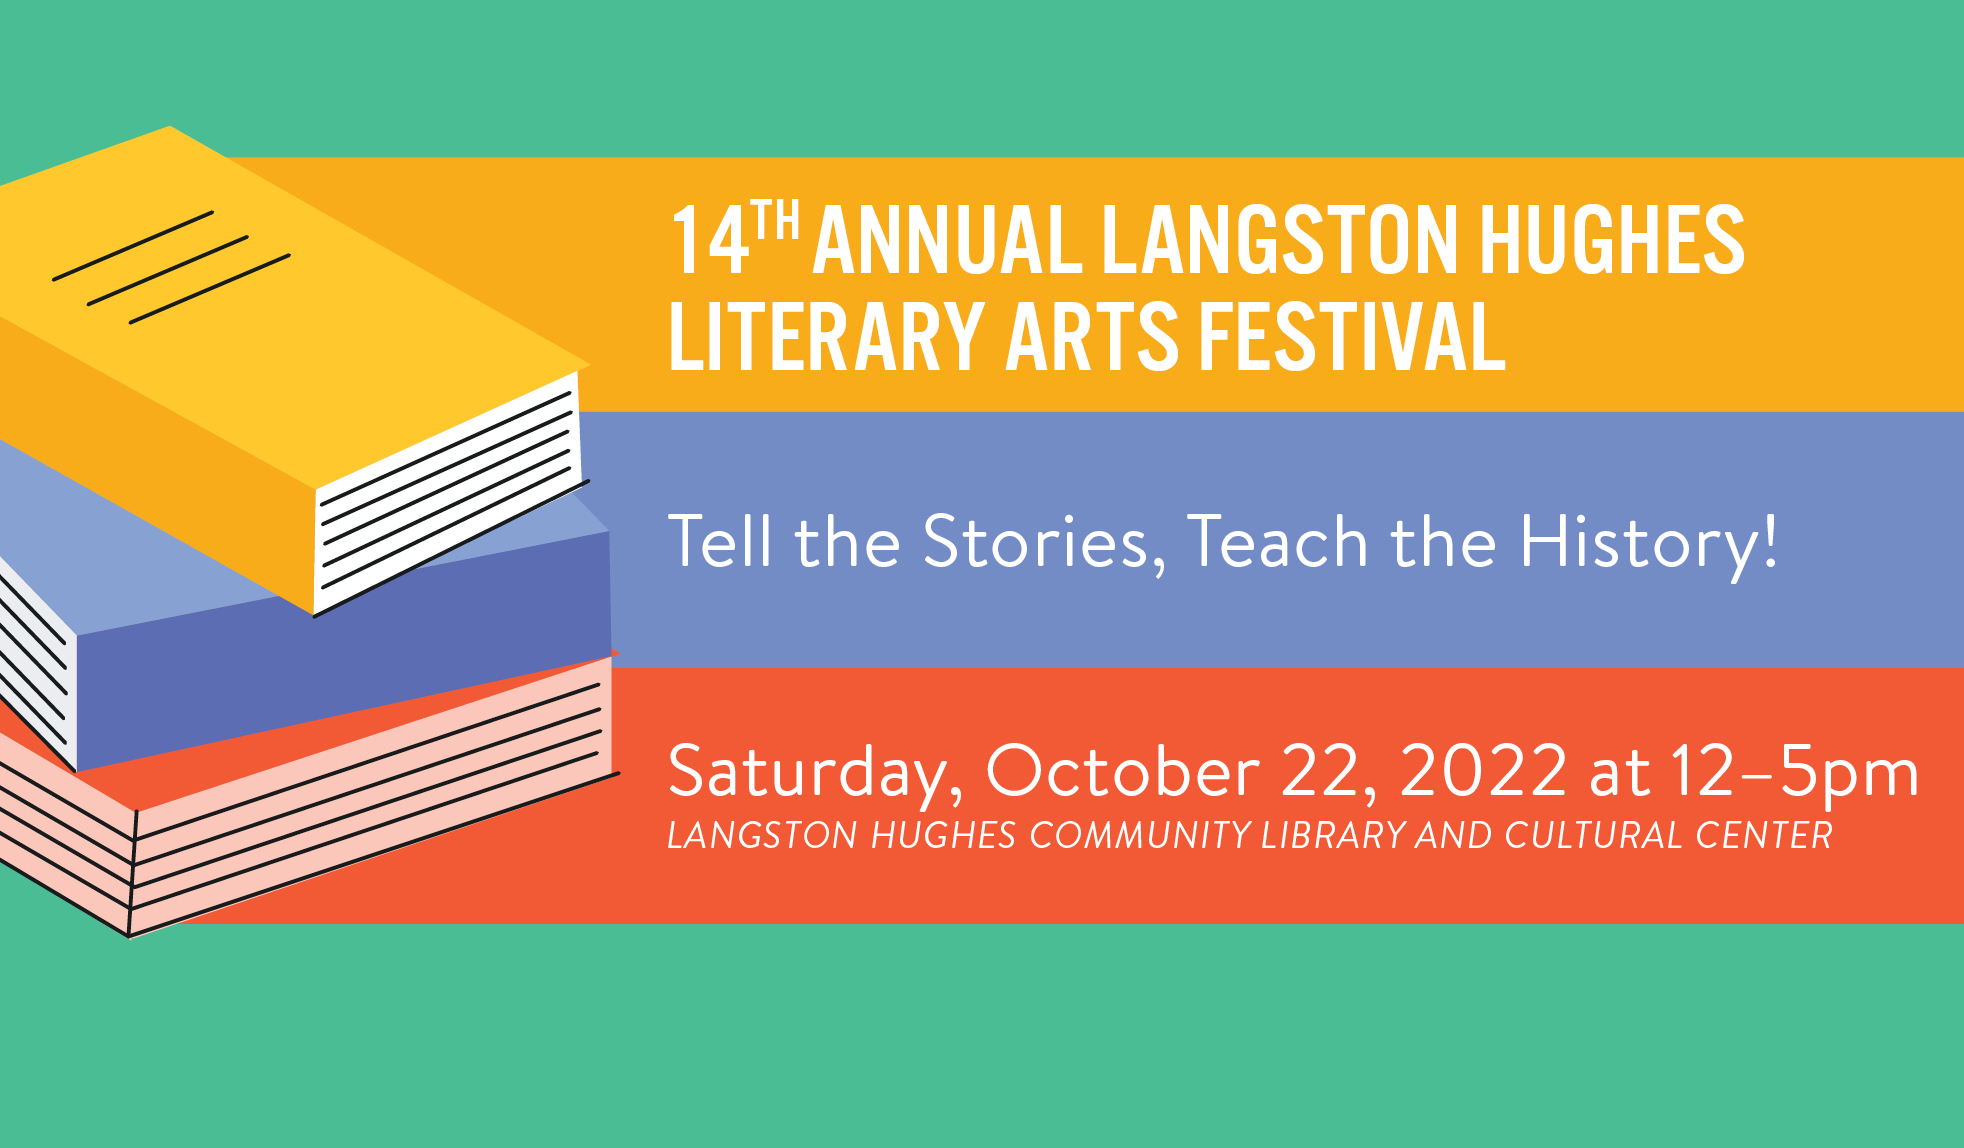 Celebrate and learn about Black literary arts at Langston Hughes Library on Saturday, Oct. 22!